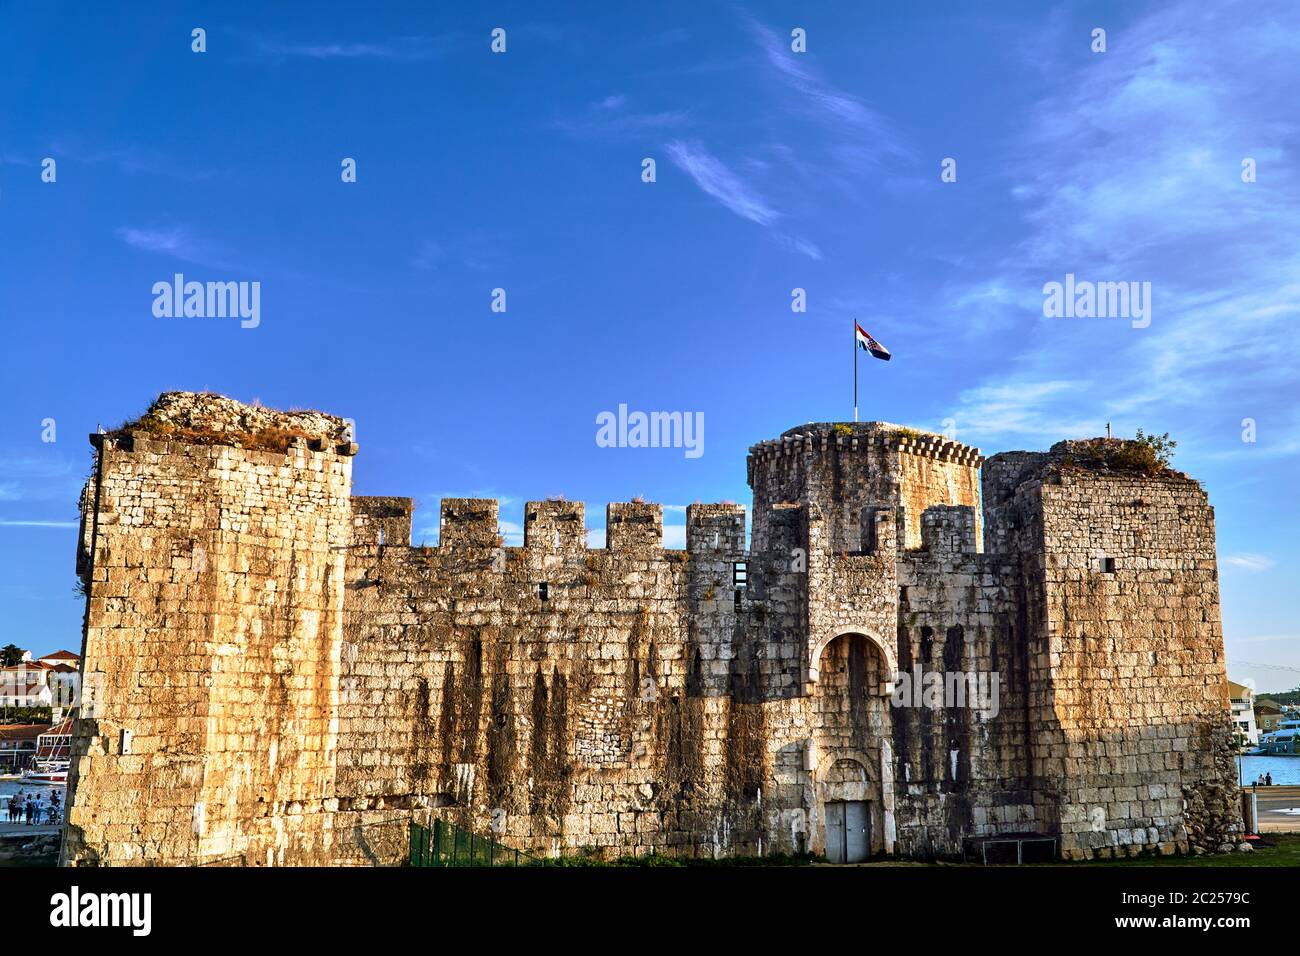 Tower and walls of Venetian fortress in the town of Trogir in Croatia Stock Photo